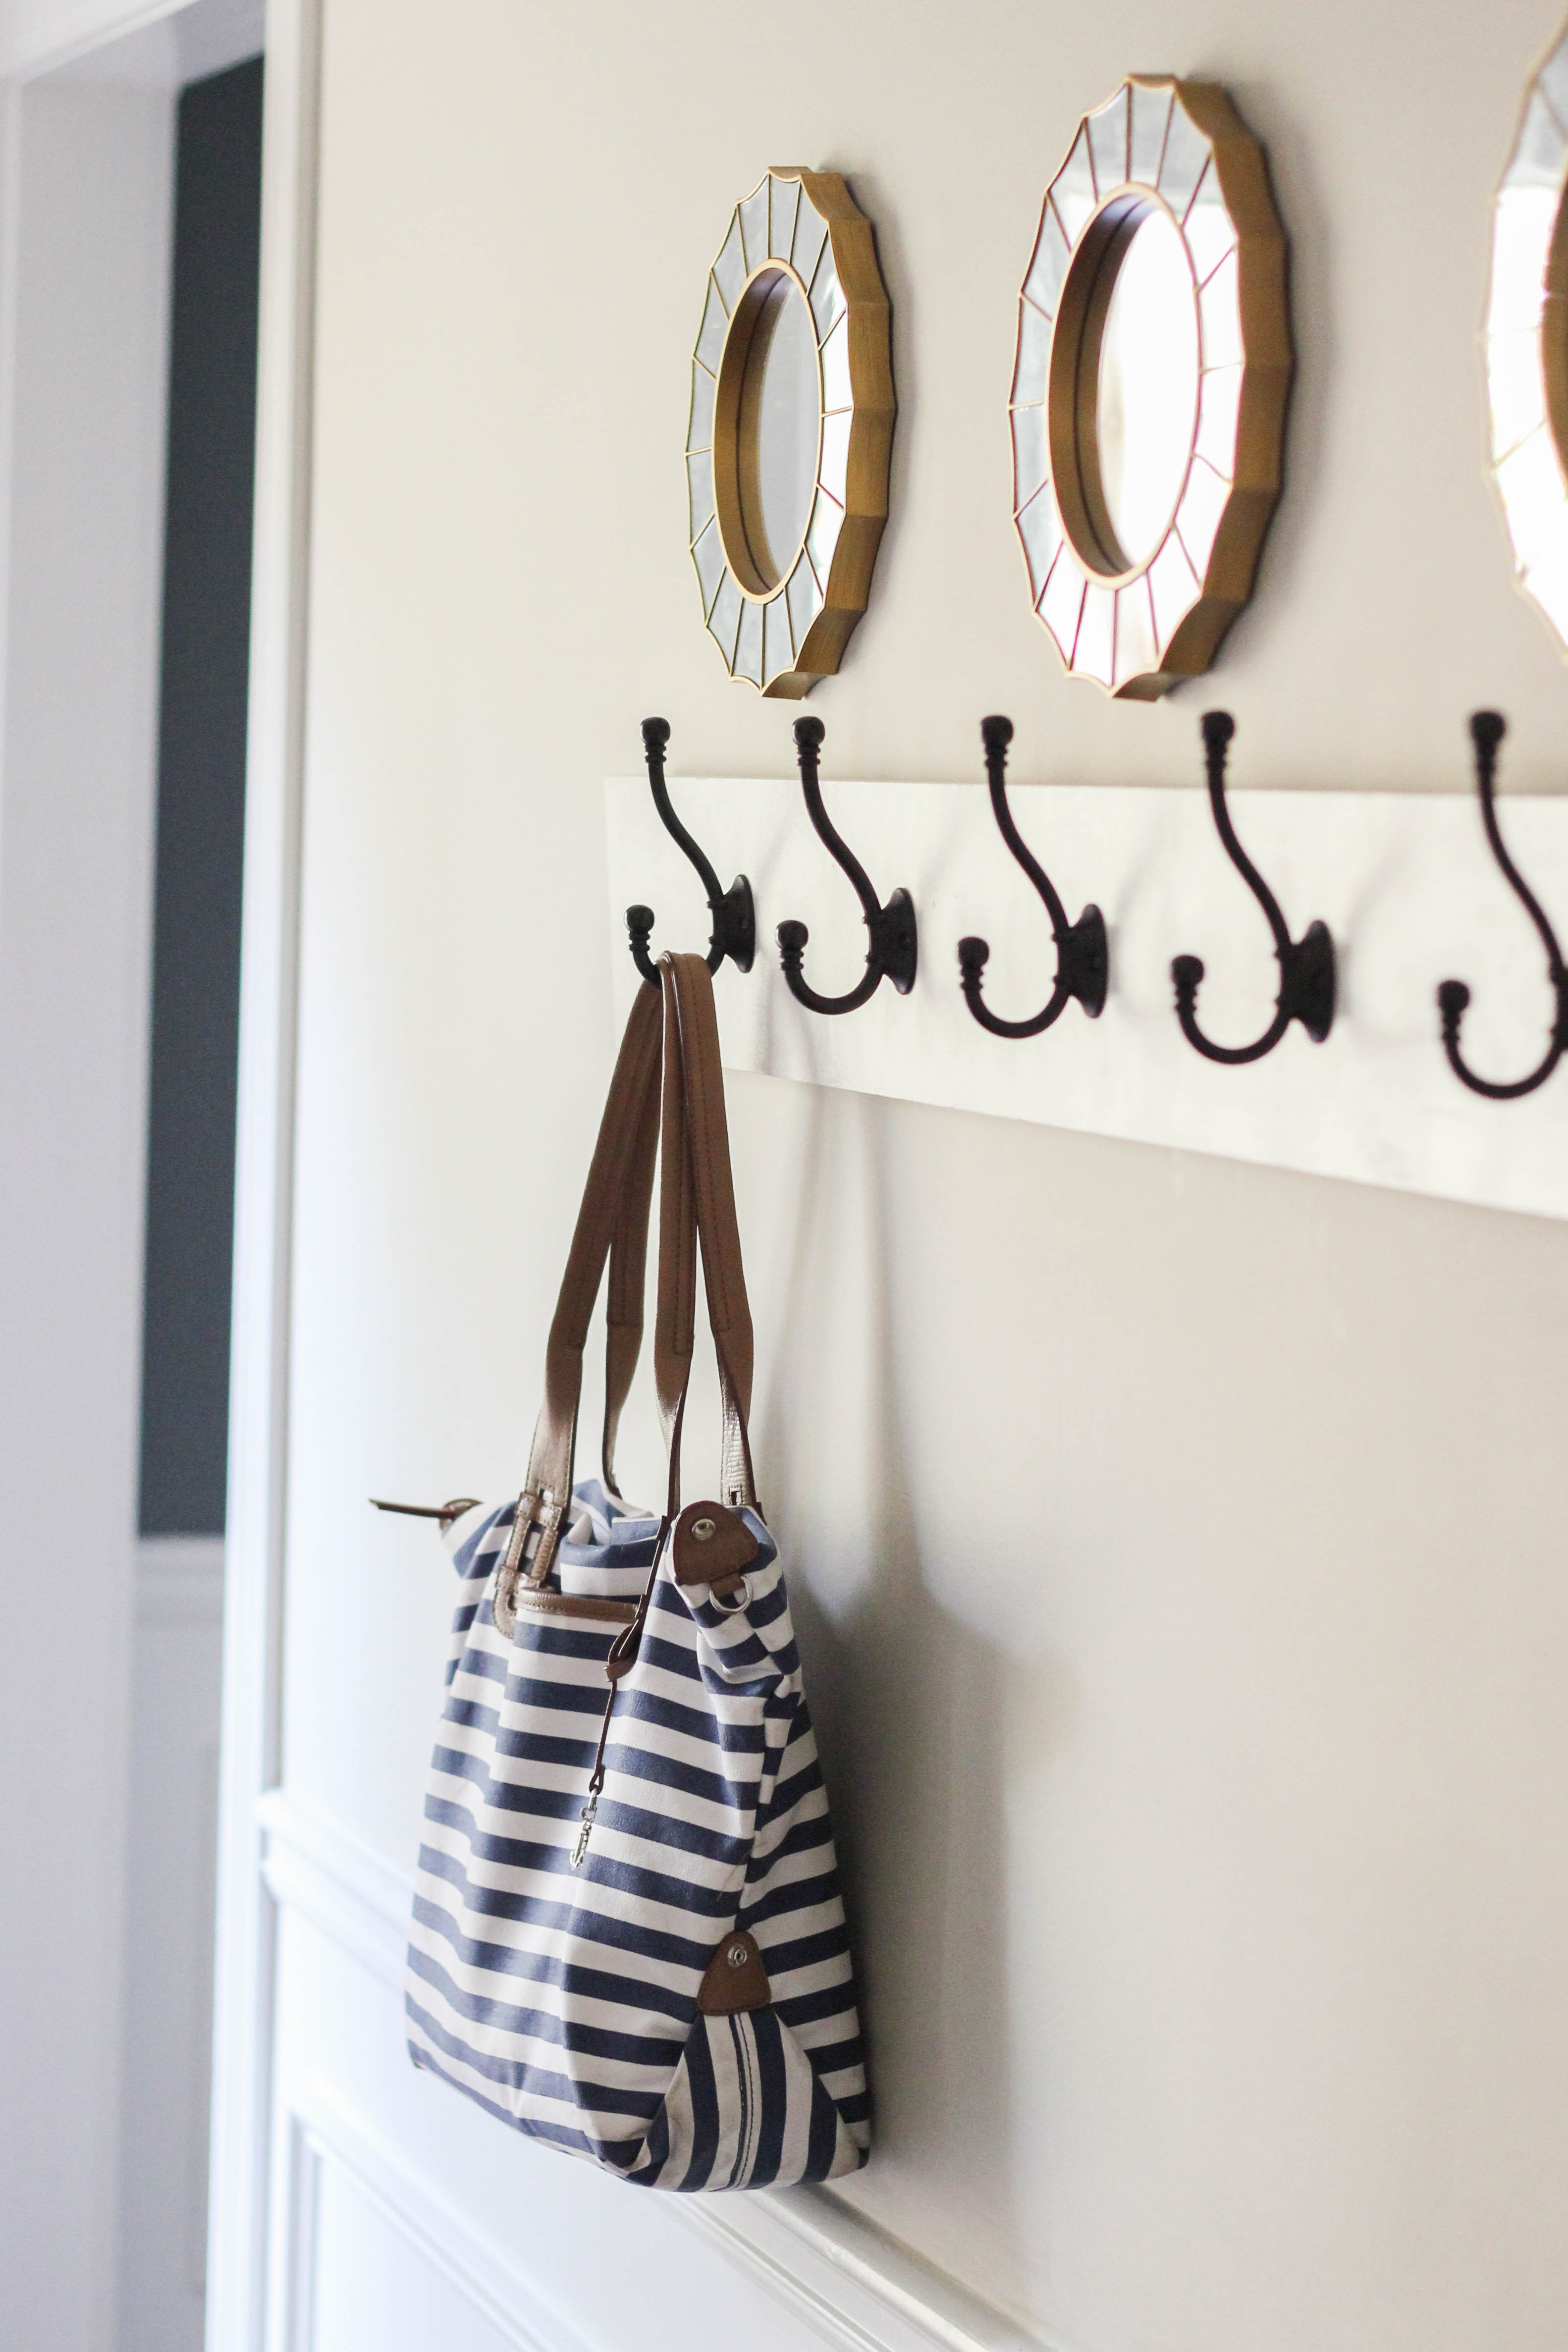 How to build a wall mounted coat rack.